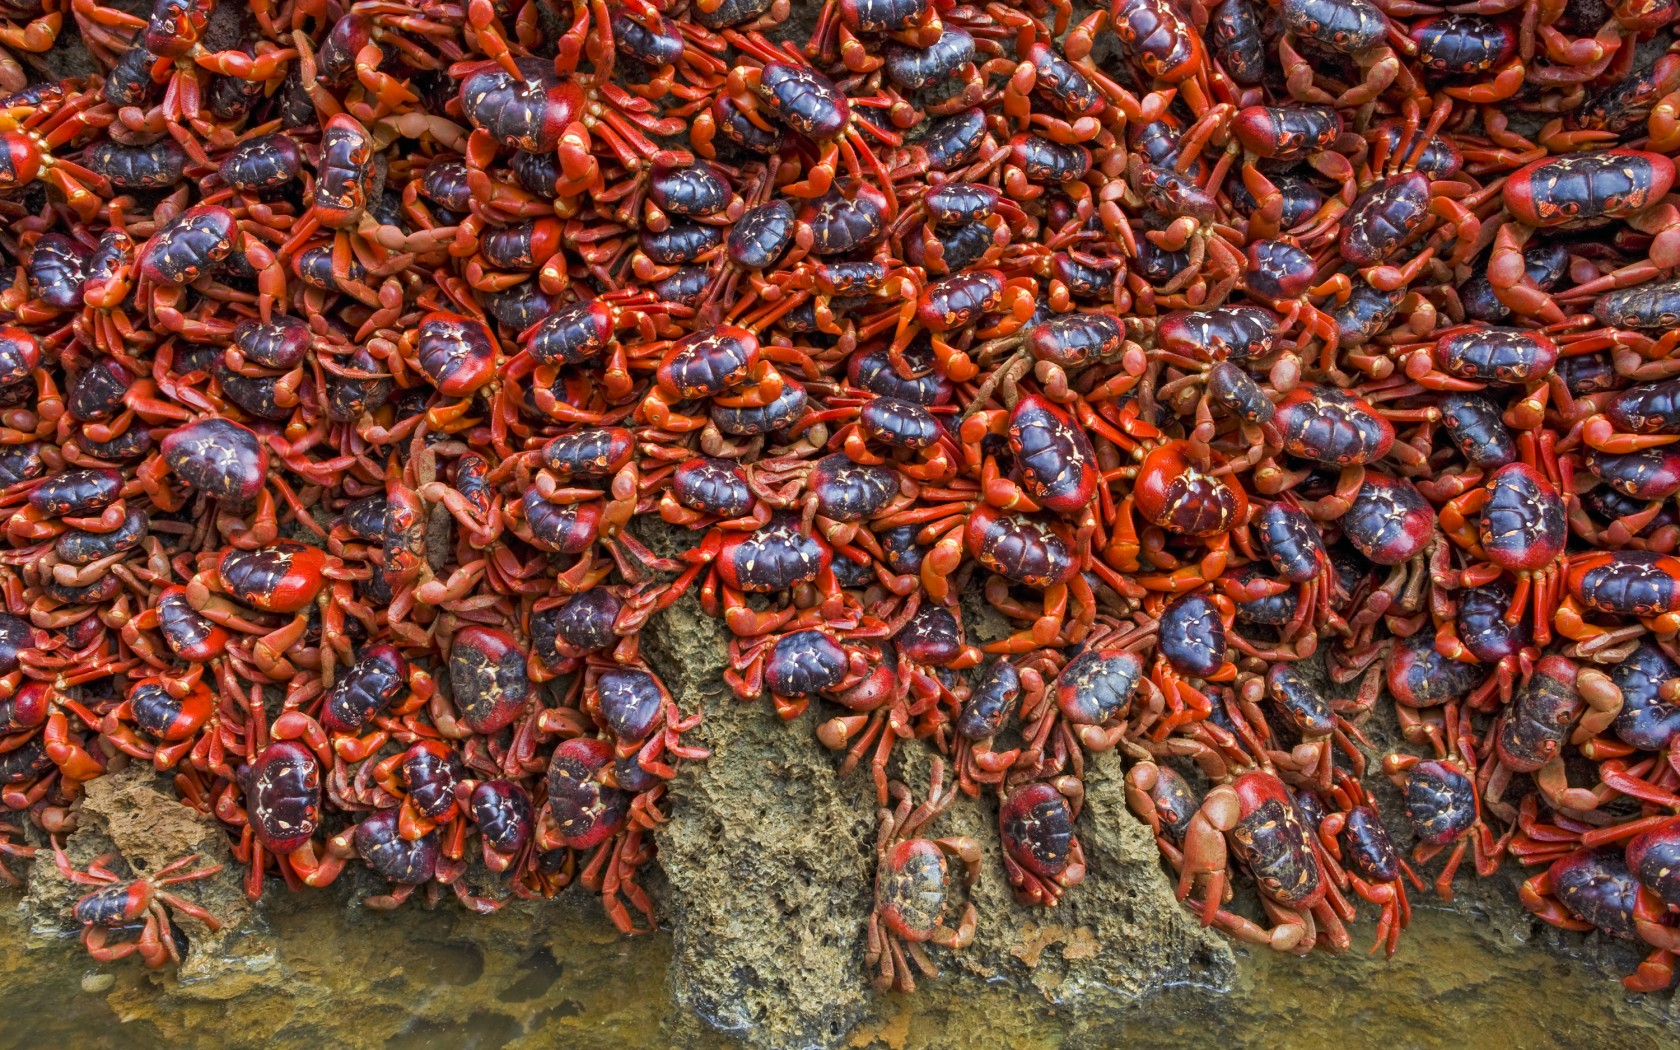 Millions of Red Crabs (Image Copyright goes to Rough Guides)